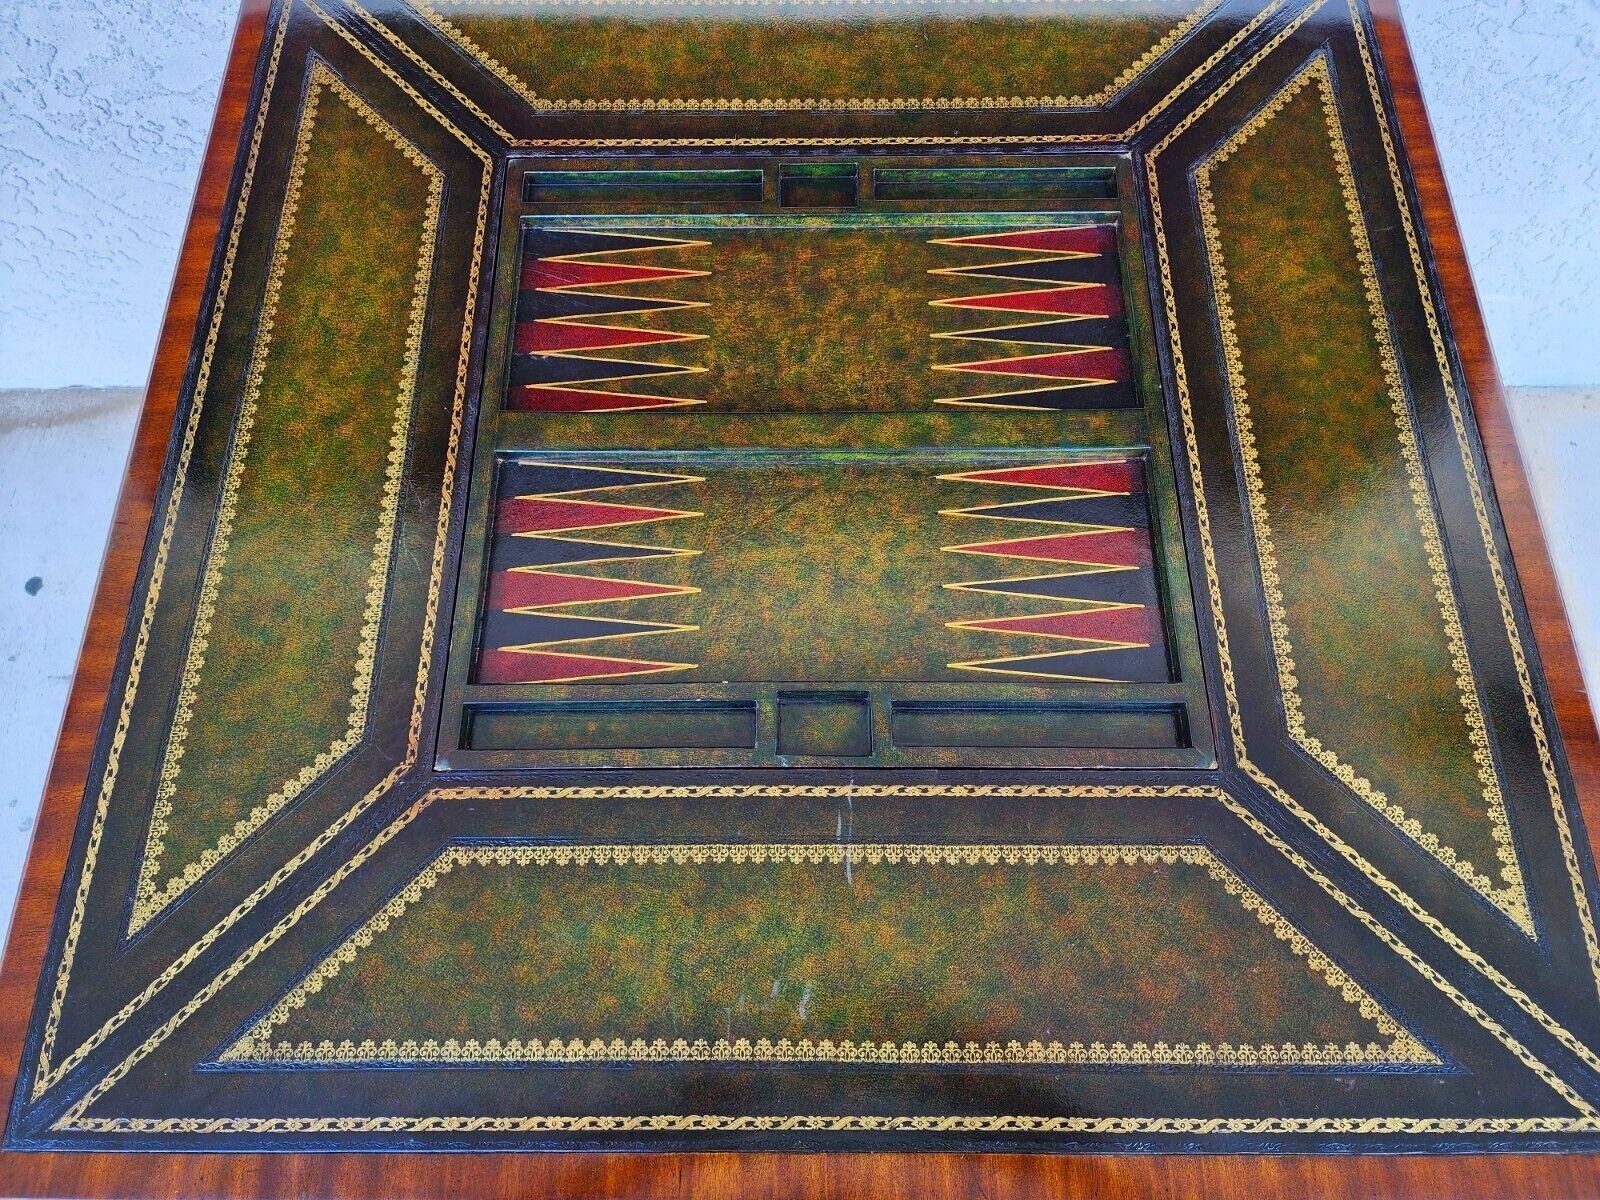 For FULL item description click on CONTINUE READING at the bottom of this page.

Offering one of our recent palm beach estate fine furniture acquisitions of a
vintage 1980s game table by Maitland Smith
Featuring a reversible Chess and Backgammon